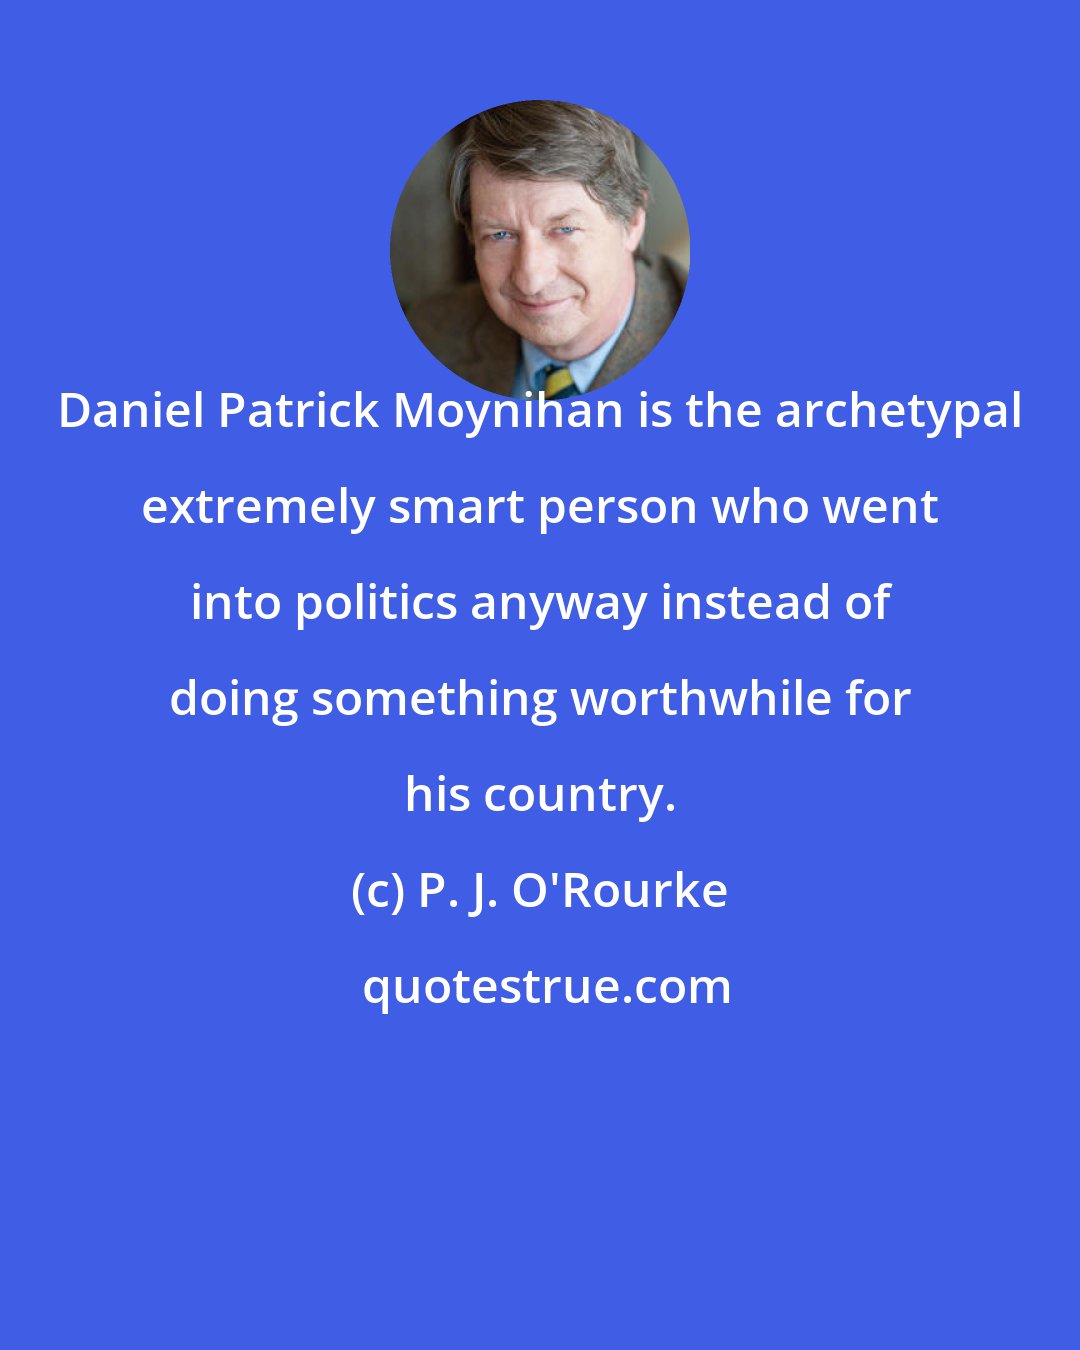 P. J. O'Rourke: Daniel Patrick Moynihan is the archetypal extremely smart person who went into politics anyway instead of doing something worthwhile for his country.